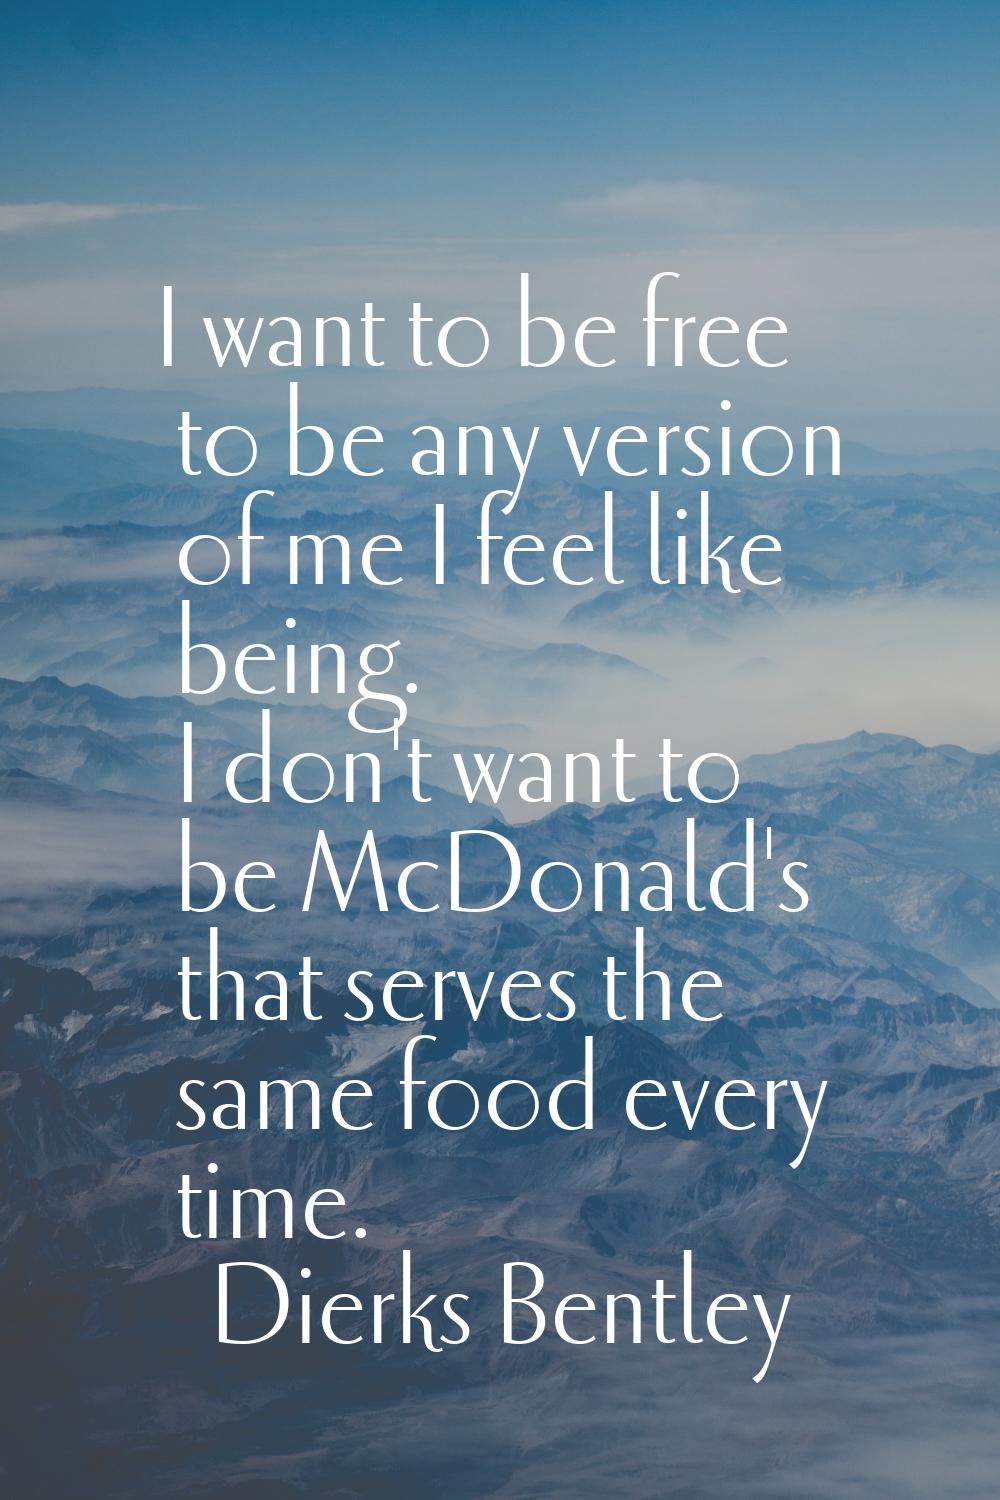 I want to be free to be any version of me I feel like being. I don't want to be McDonald's that ser